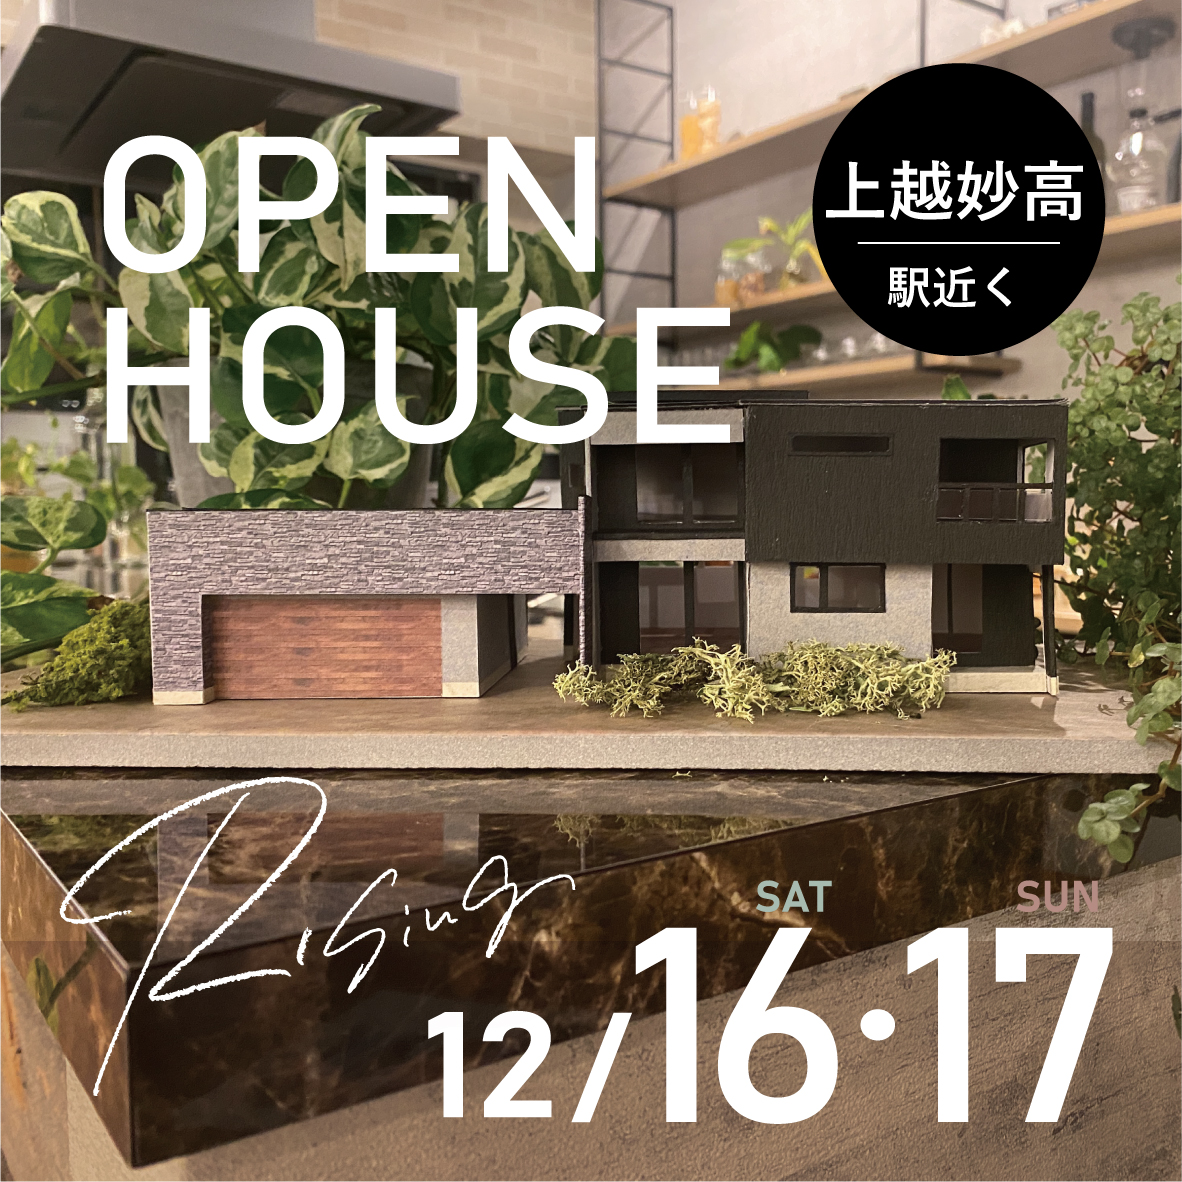 12/16.17【Rising】OPEN HOUSE！